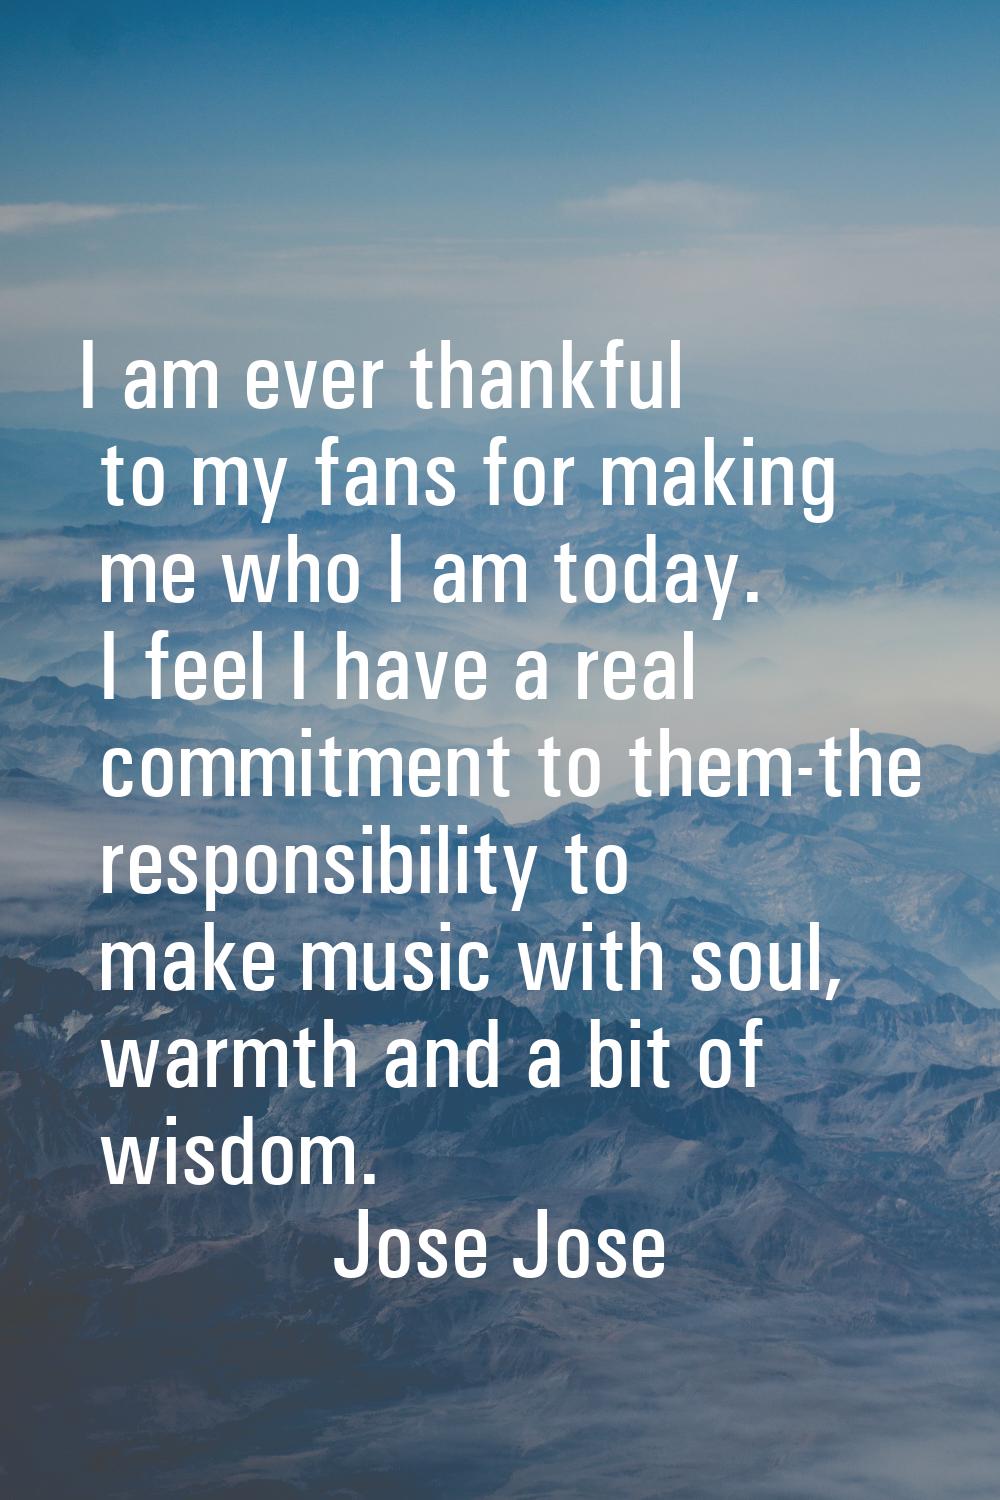 I am ever thankful to my fans for making me who I am today. I feel I have a real commitment to them